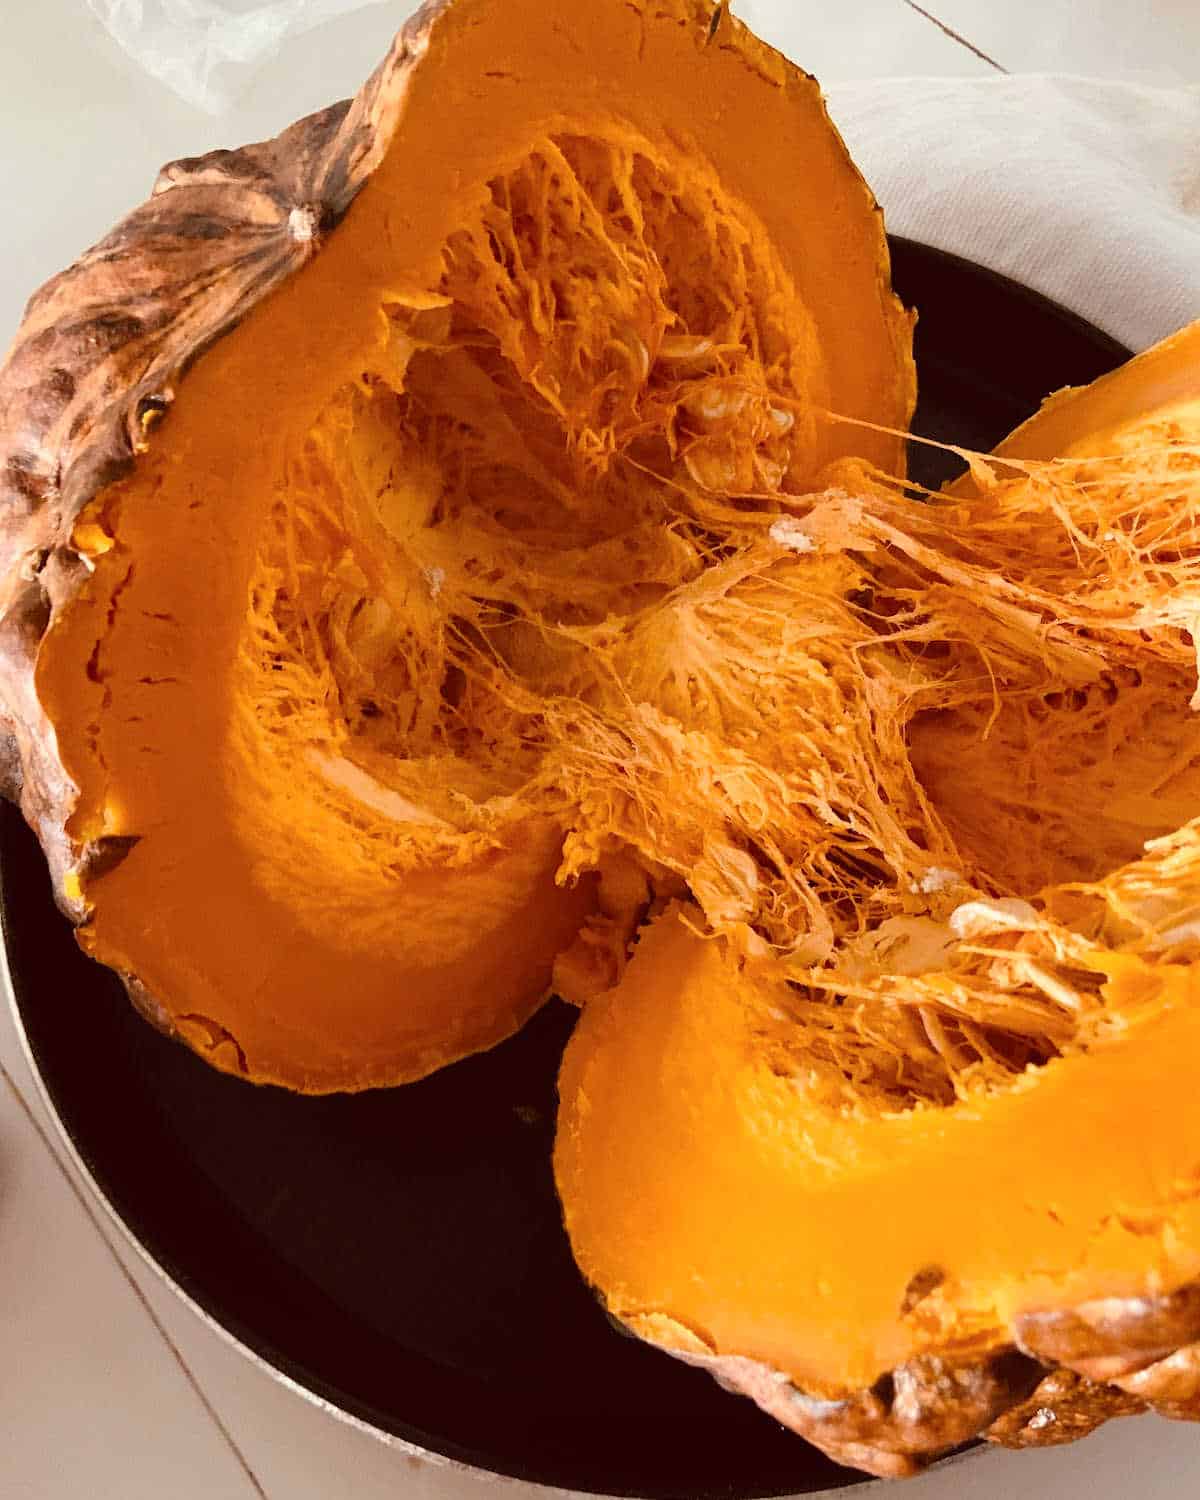 Dark round pan on a white table with opened baked whole pumpkin.